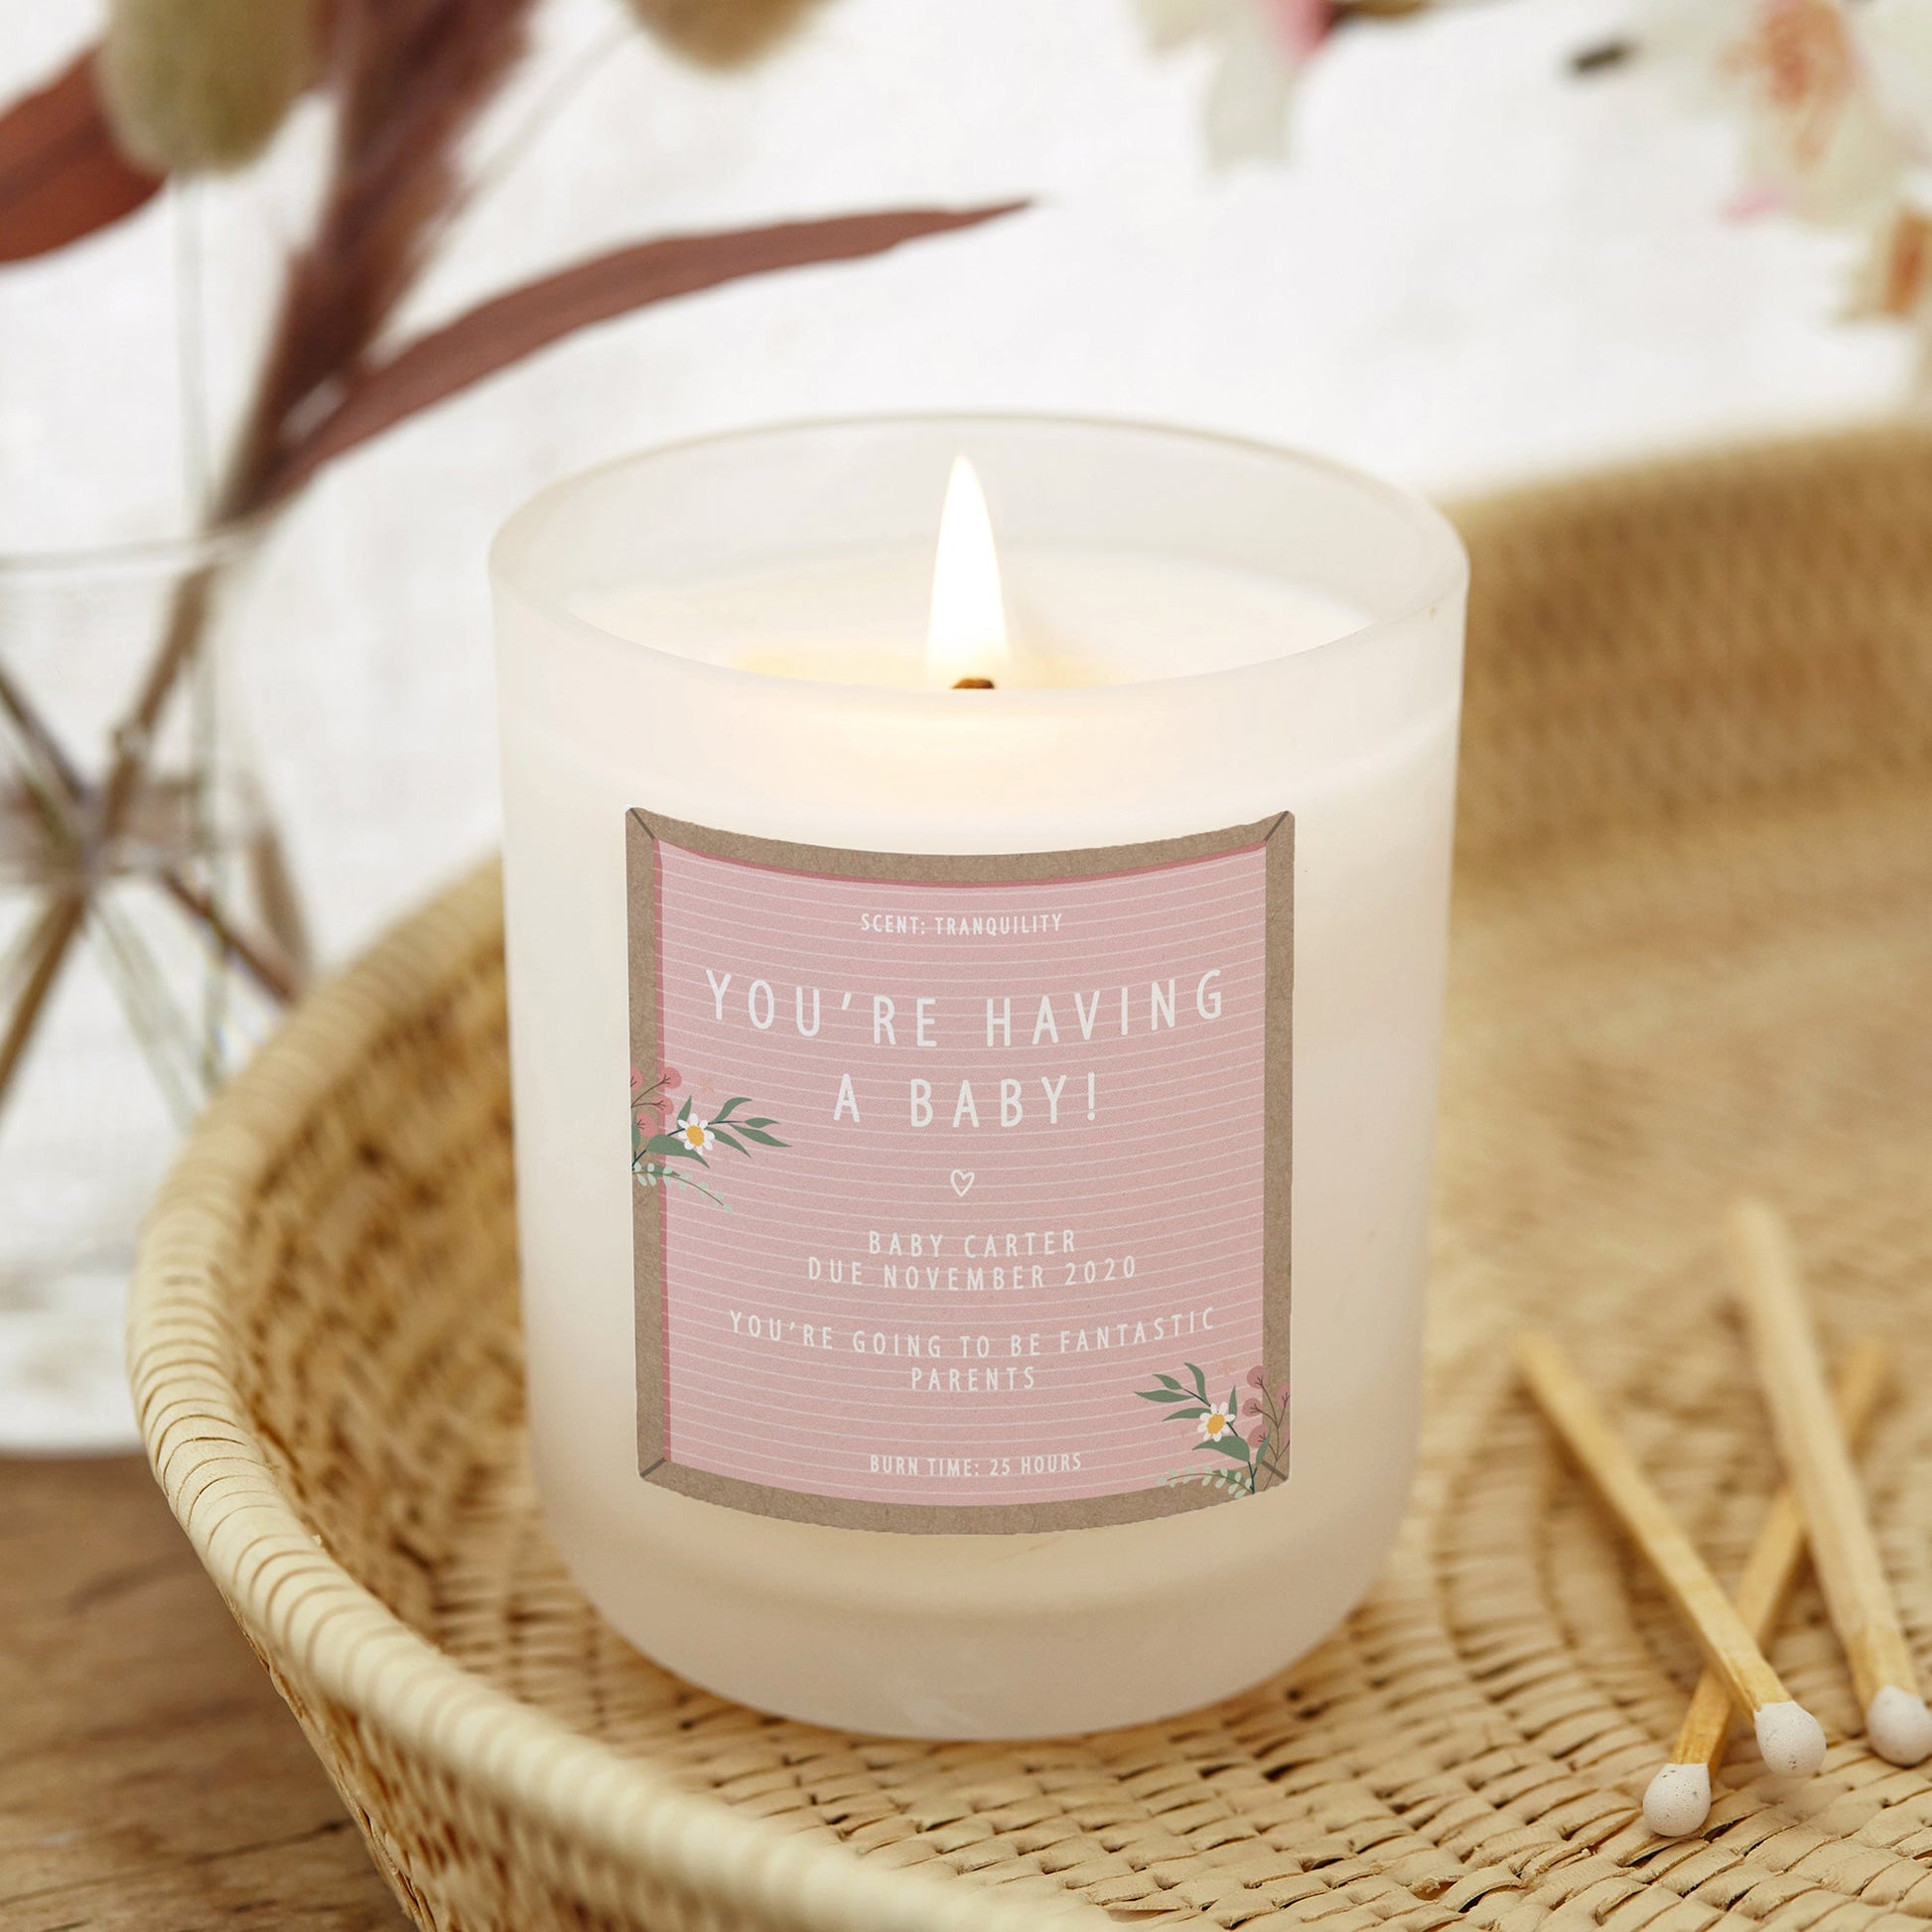 Mummy To Be Gift Congratulations Candle - Kindred Fires